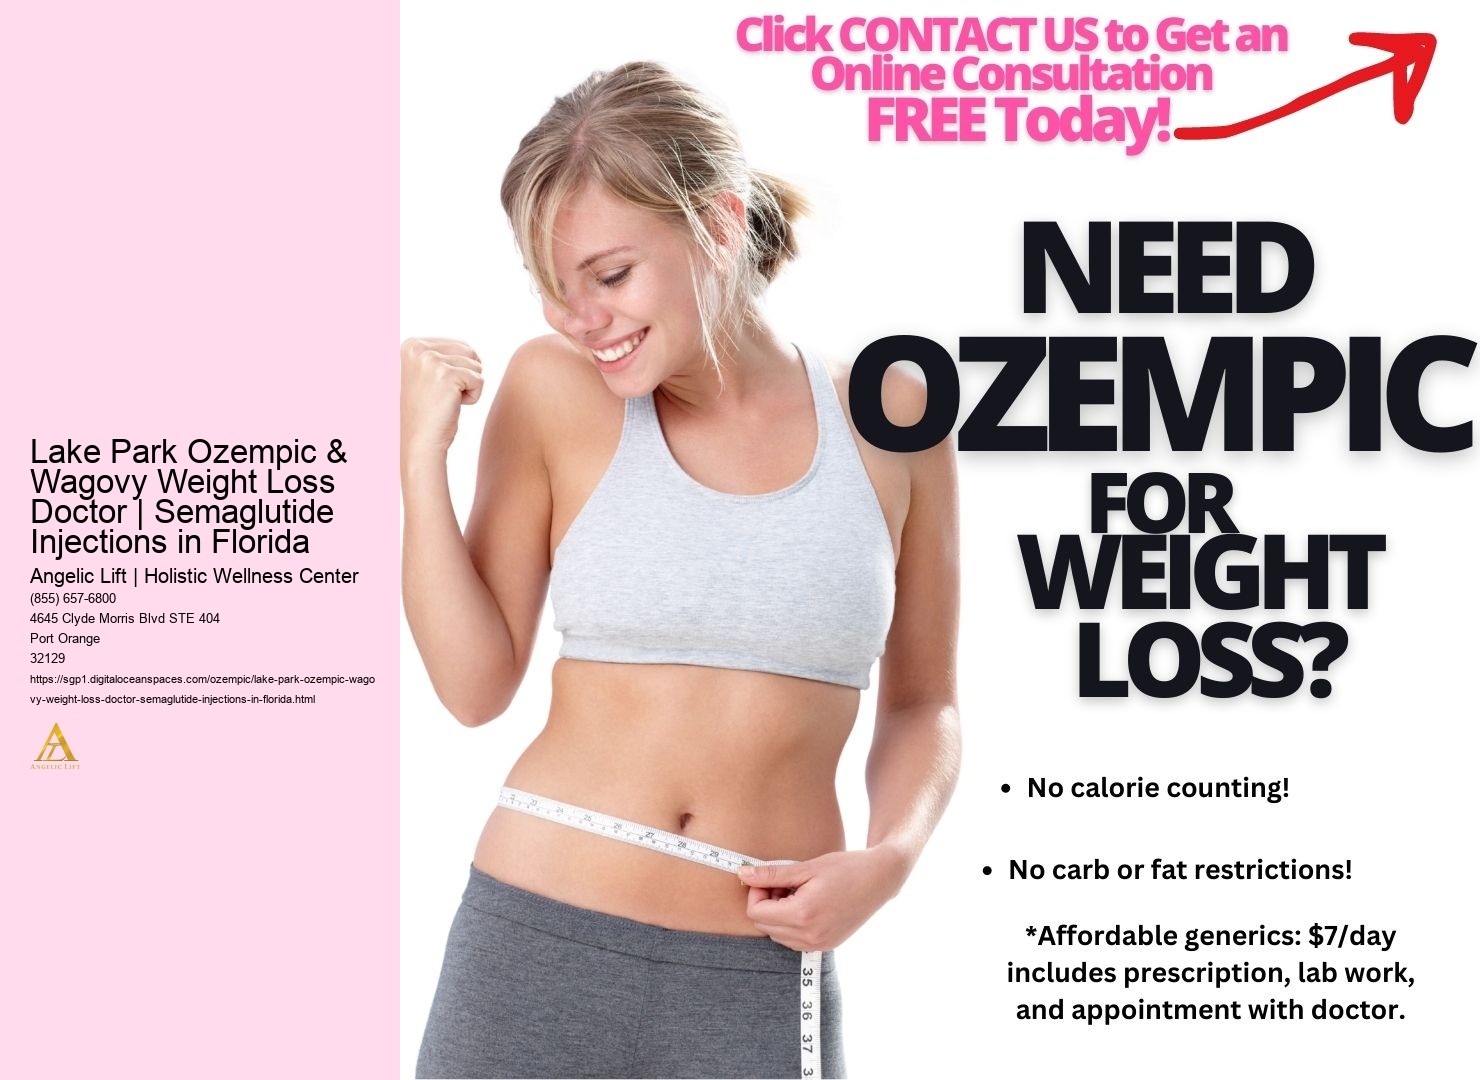 Lake Park Ozempic & Wagovy Weight Loss Doctor | Semaglutide Injections in Florida